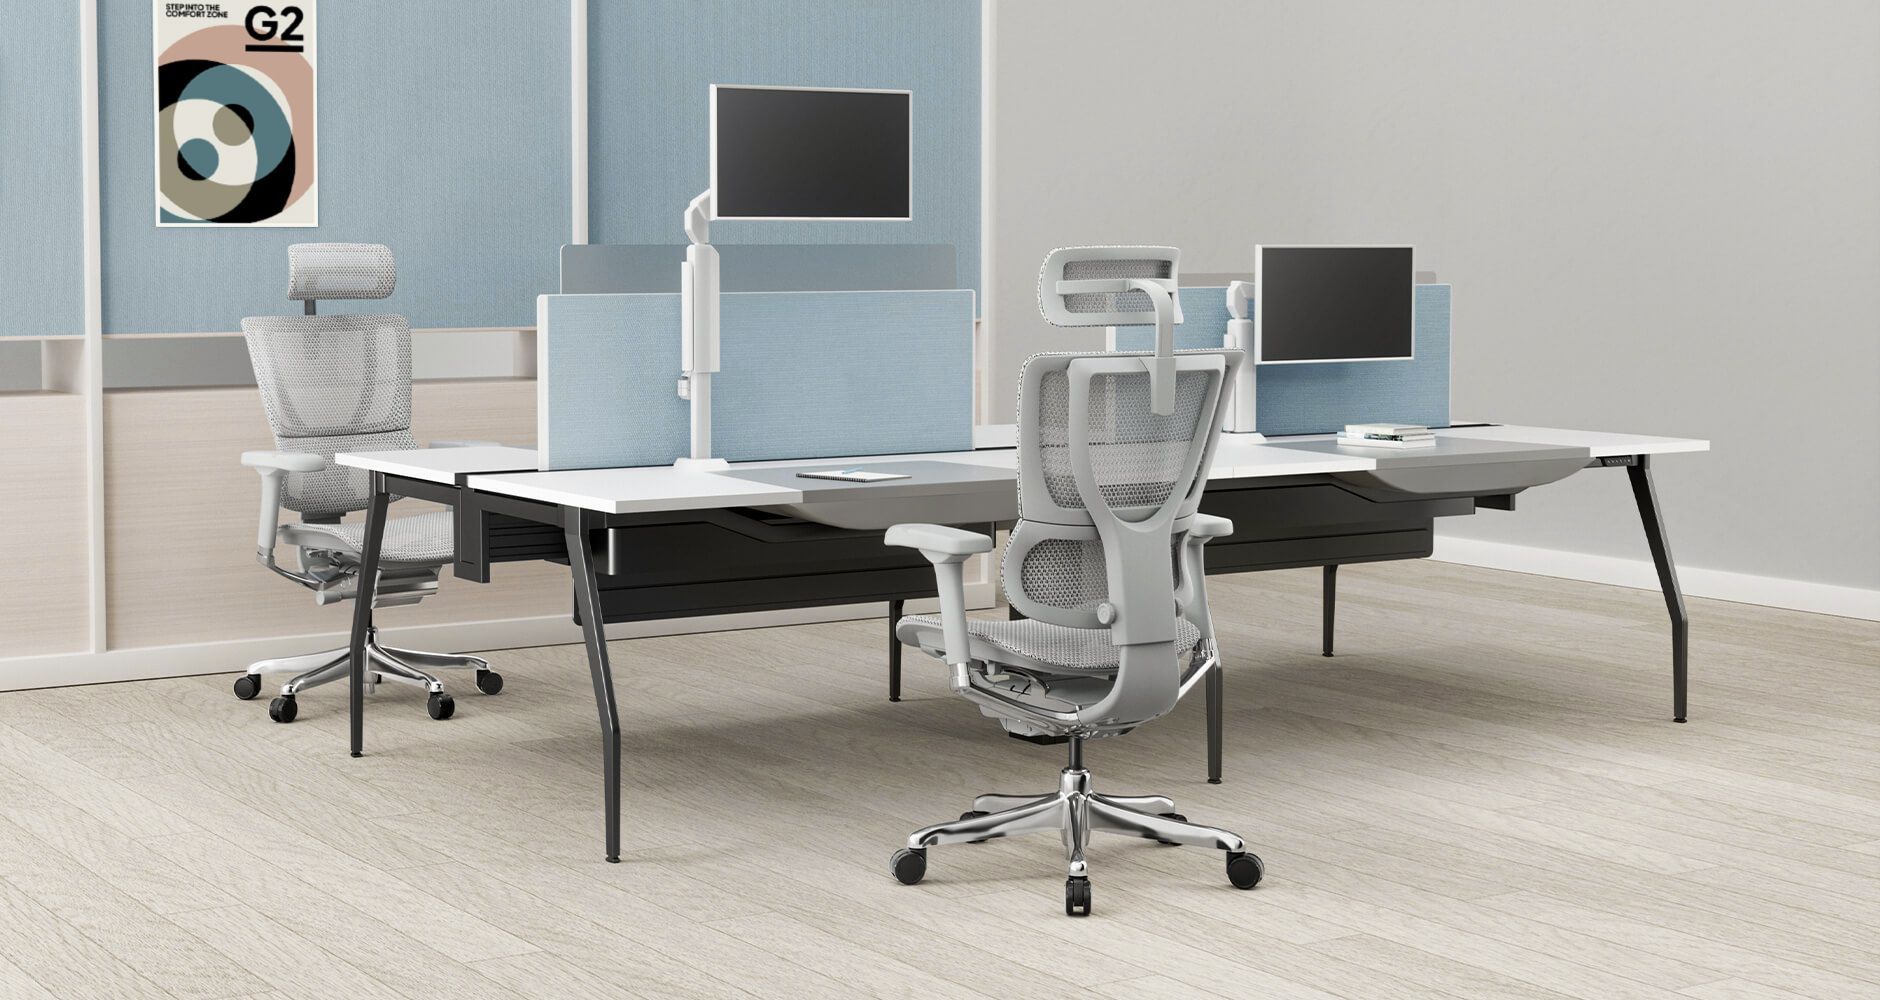 A group of four desks sits in a large office. At two of the desks are the grey Mirus Elite G2 chair. The desks have monitors on a monitor arm so workers can switch between sitting and standing. 